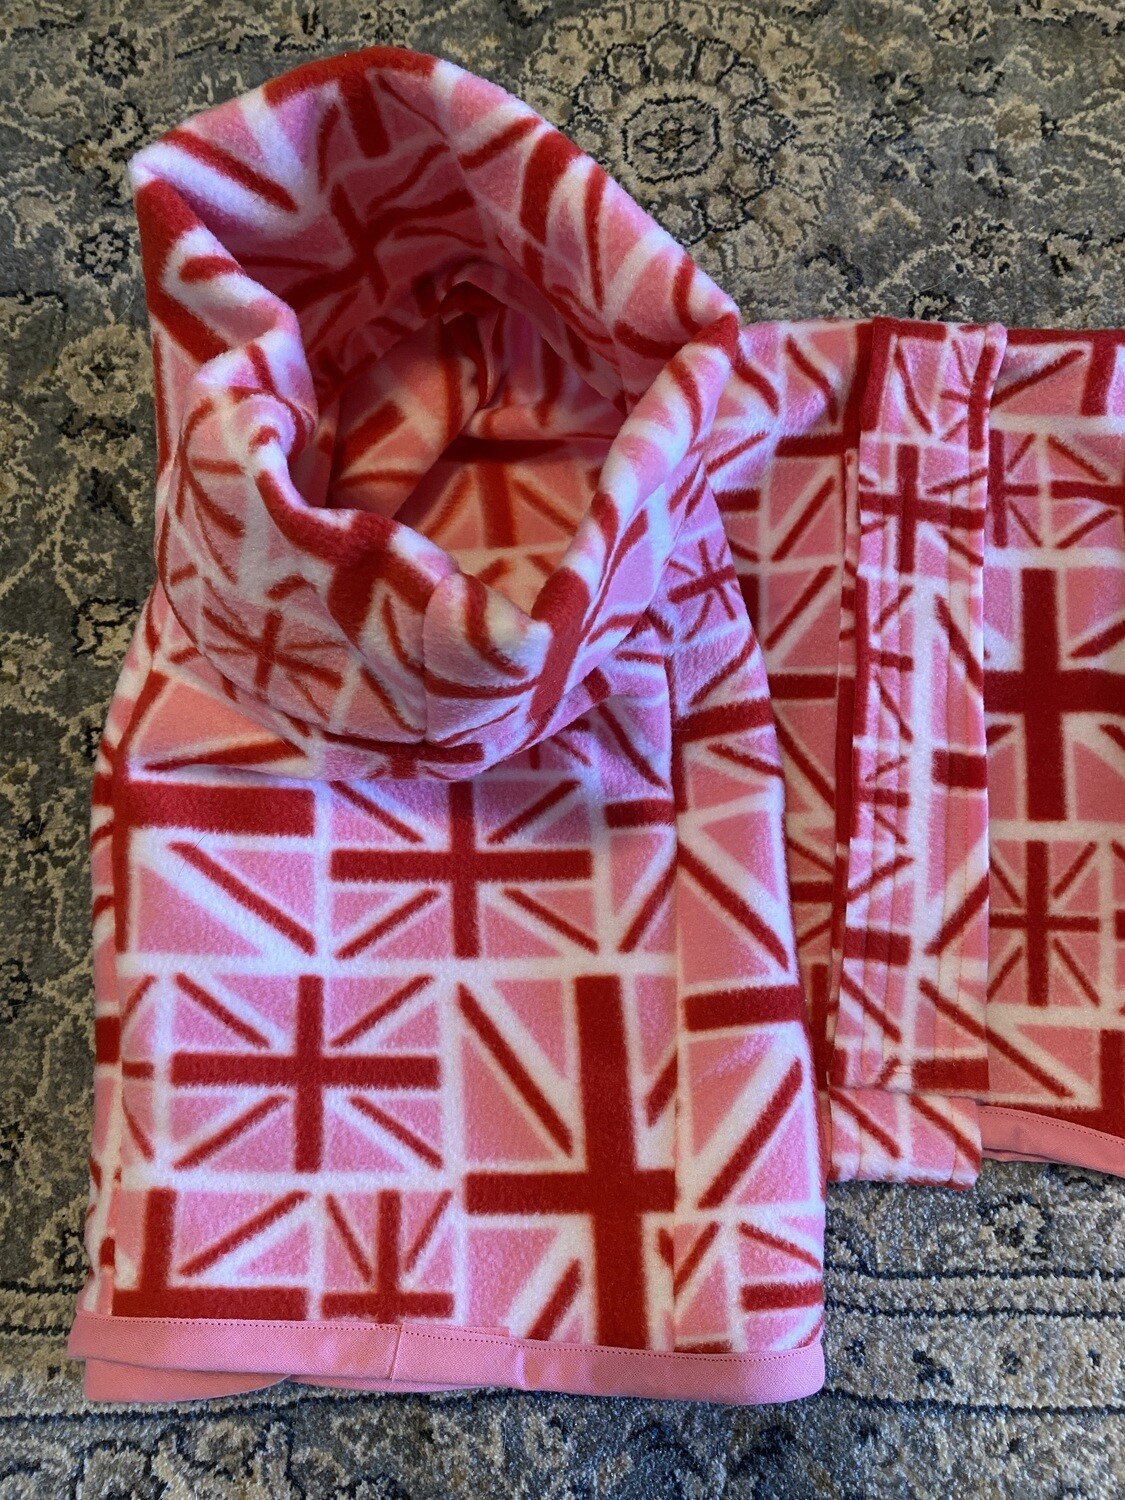 HANDMADE WITH LOVE -  30" Union Jack Red, Pink & White Fleece